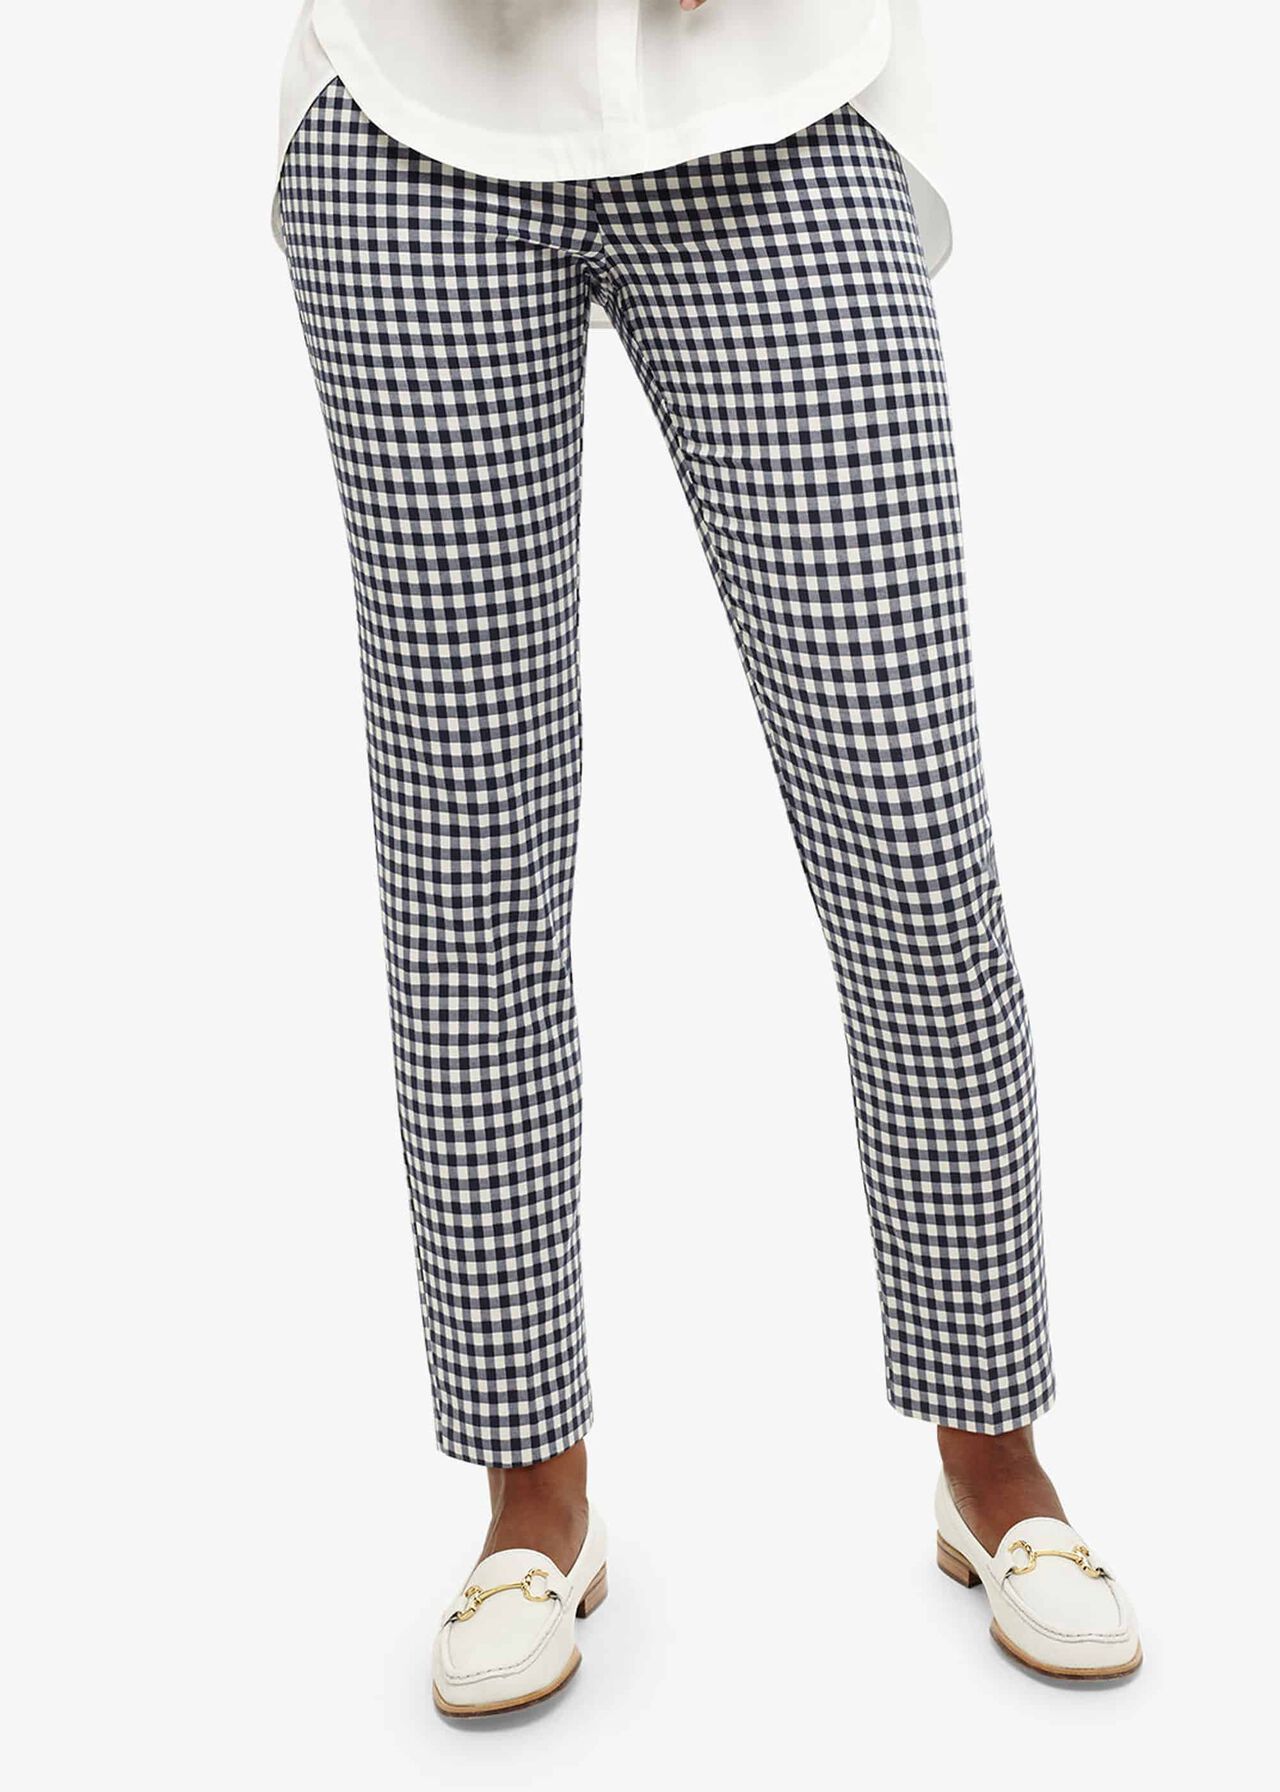 Tyna Gingham Trousers